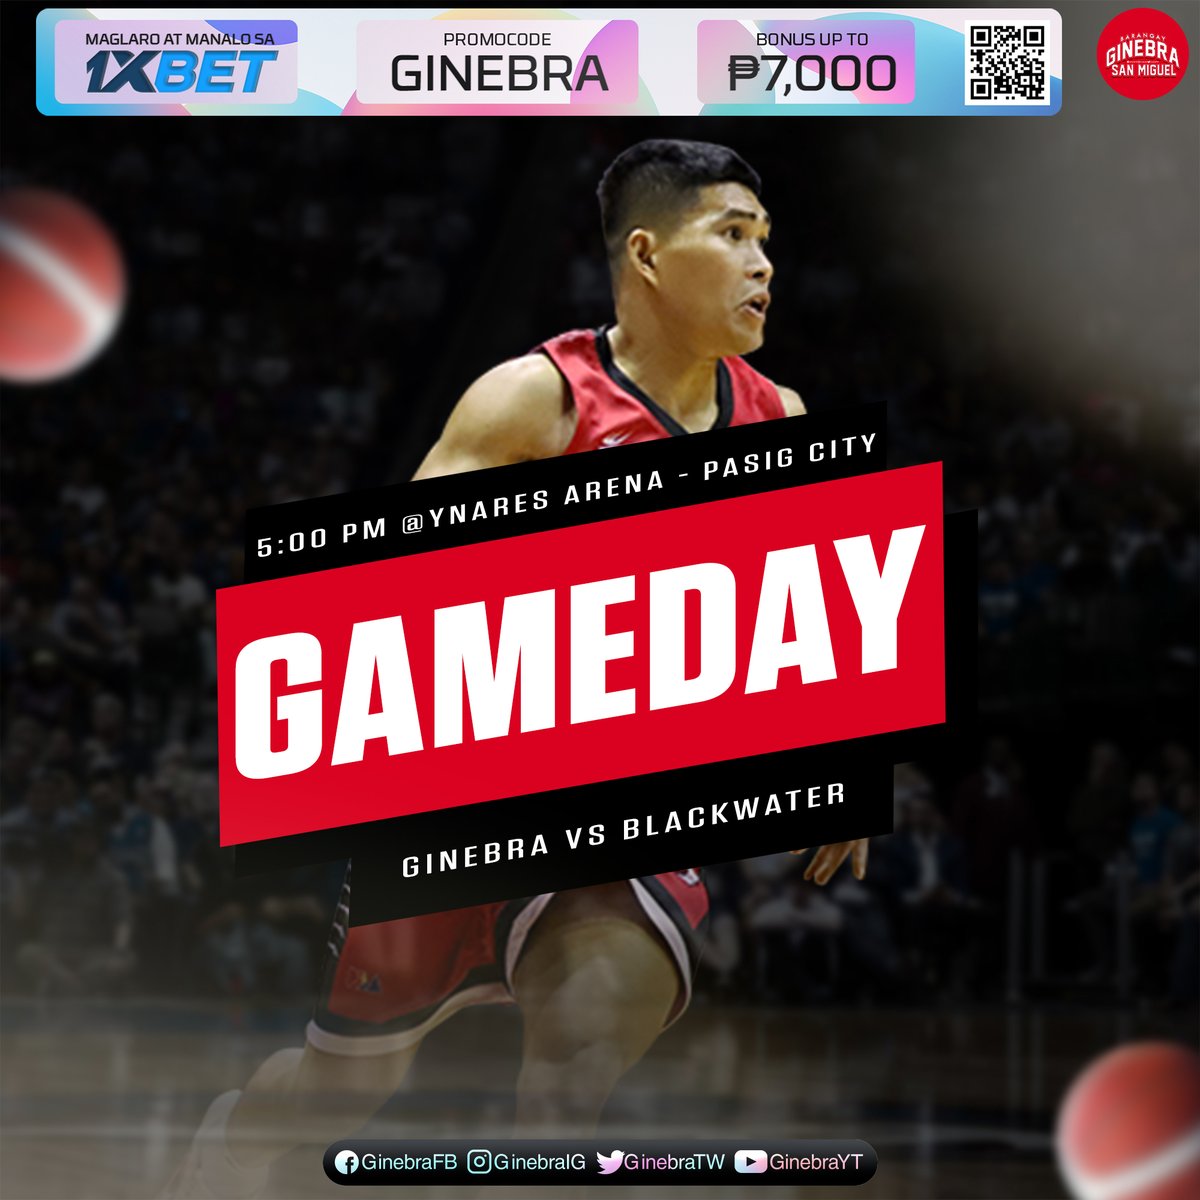 🏀 Ginebra Gameday 🏀 It’s our fifth game in the PBA on Tour and we are pumped! Let’s go, Kings! 💪 #GinebraGameday #PBAonTour #NeverSayDie